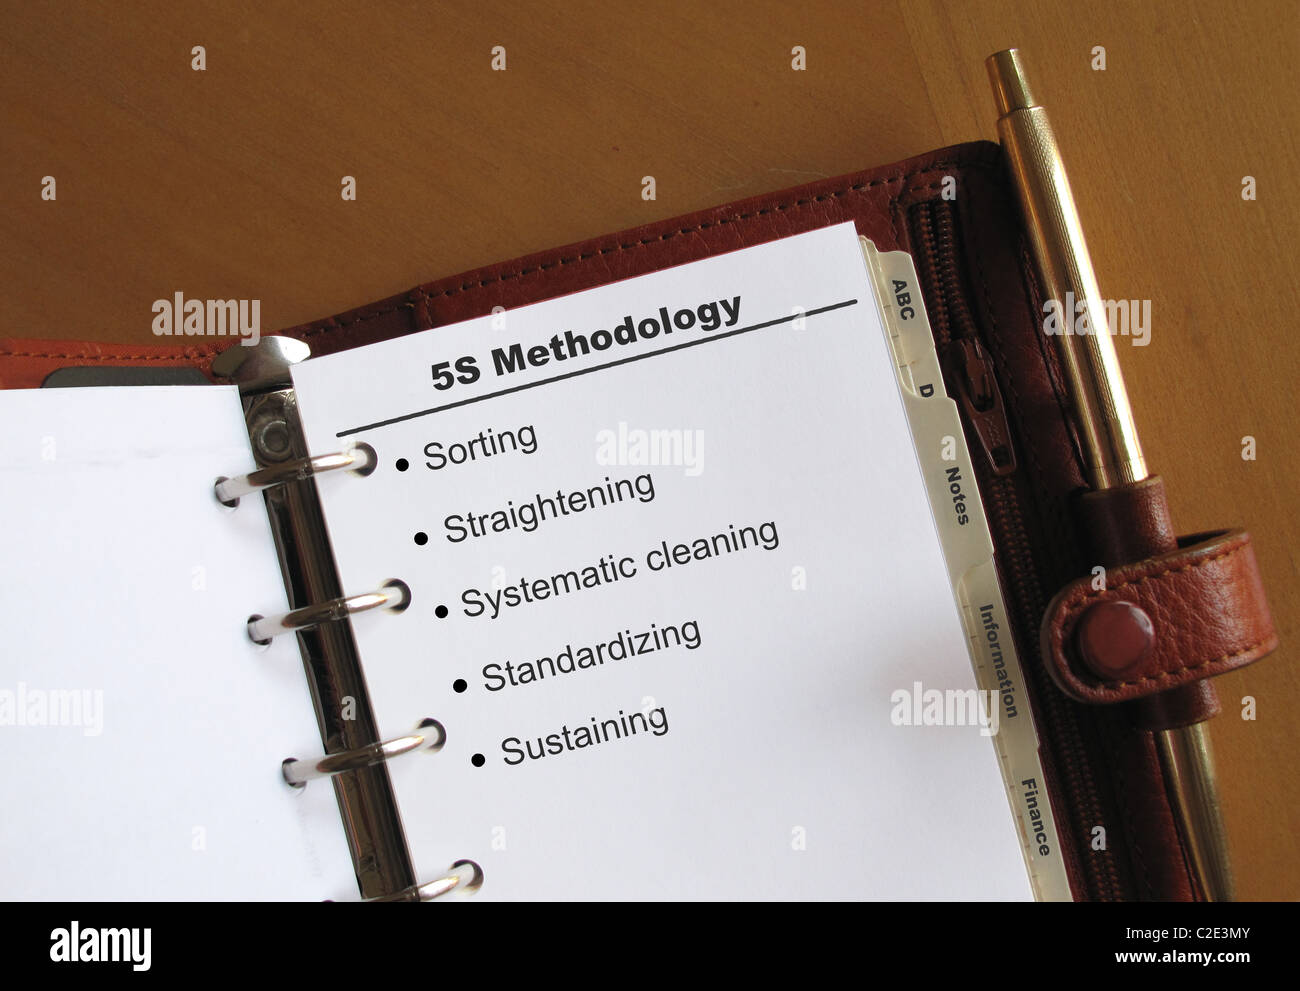 Business concepts 5S Methodology with bullets in a personal organizer Stock Photo